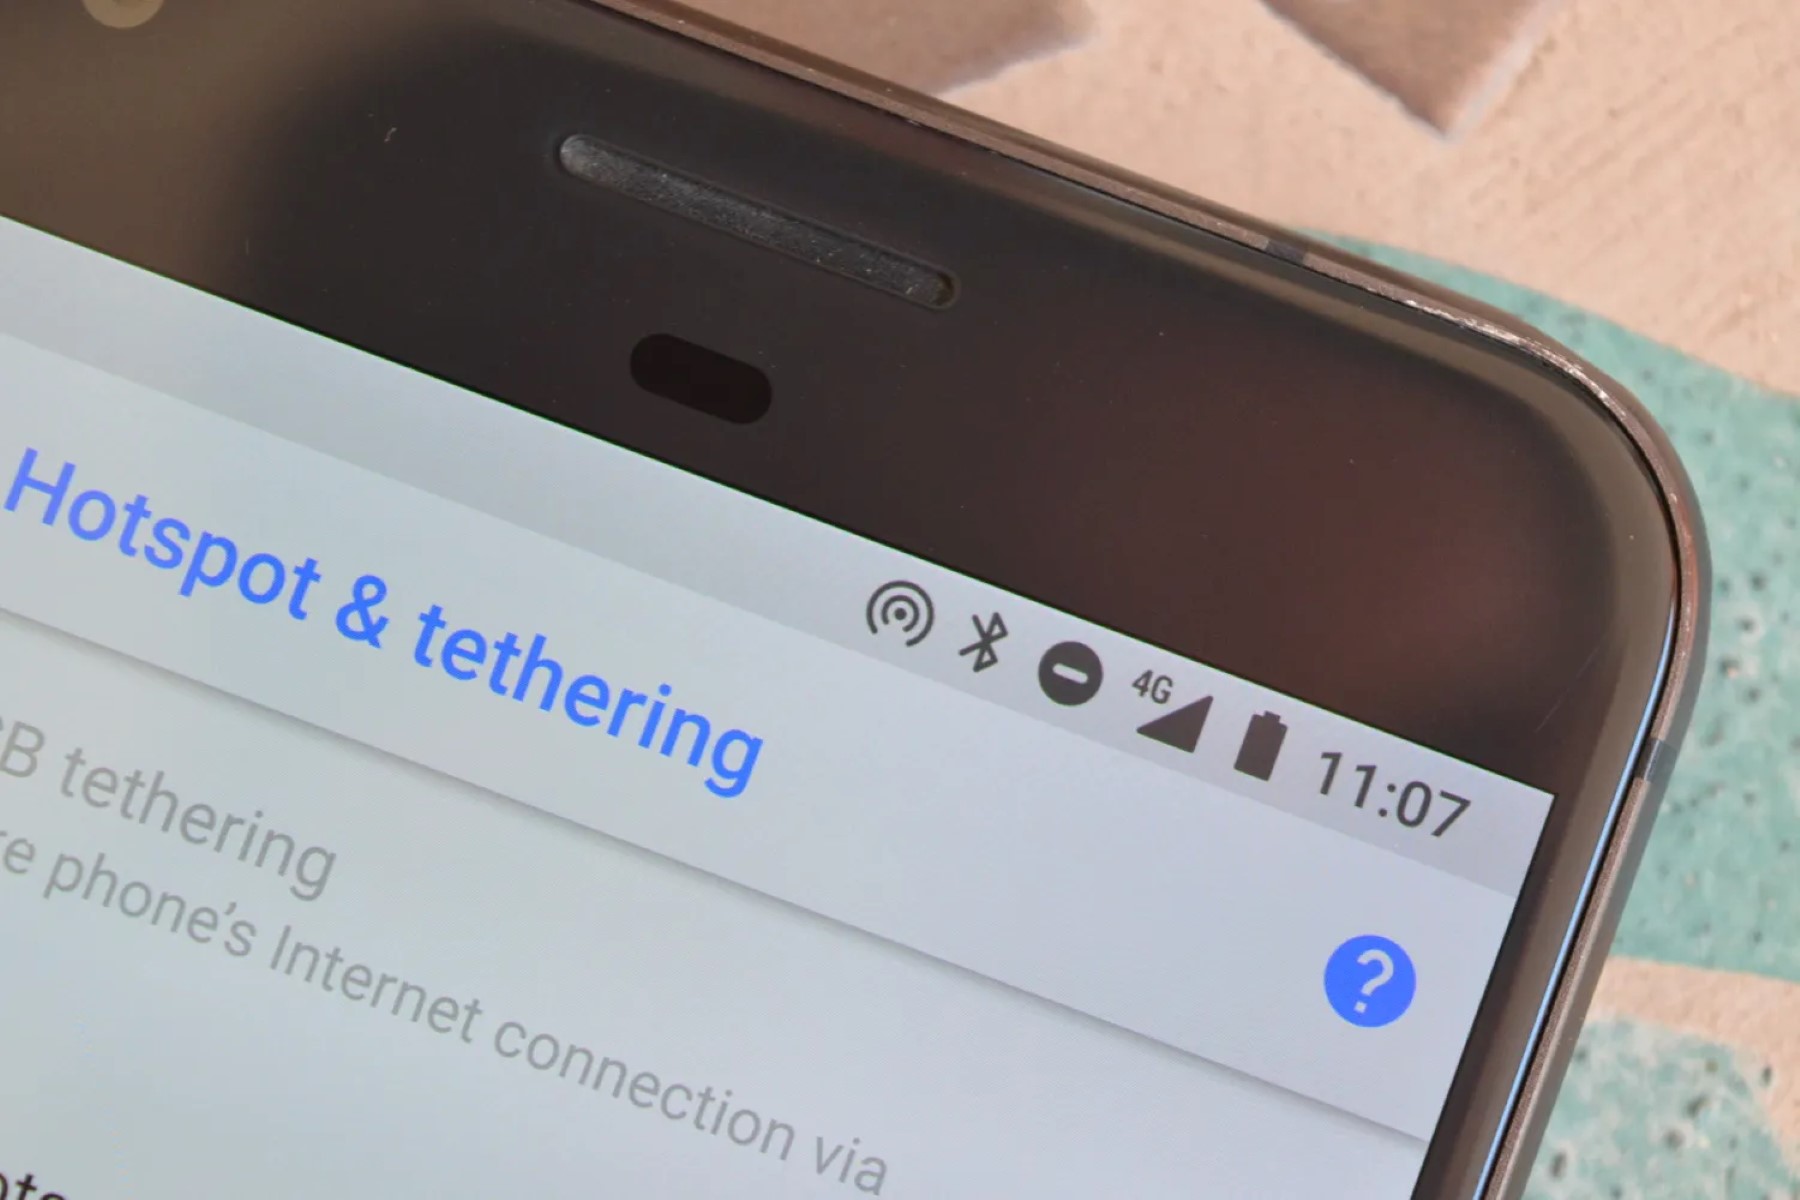 Sony Xperia Hotspot Activation: A Quick How-To